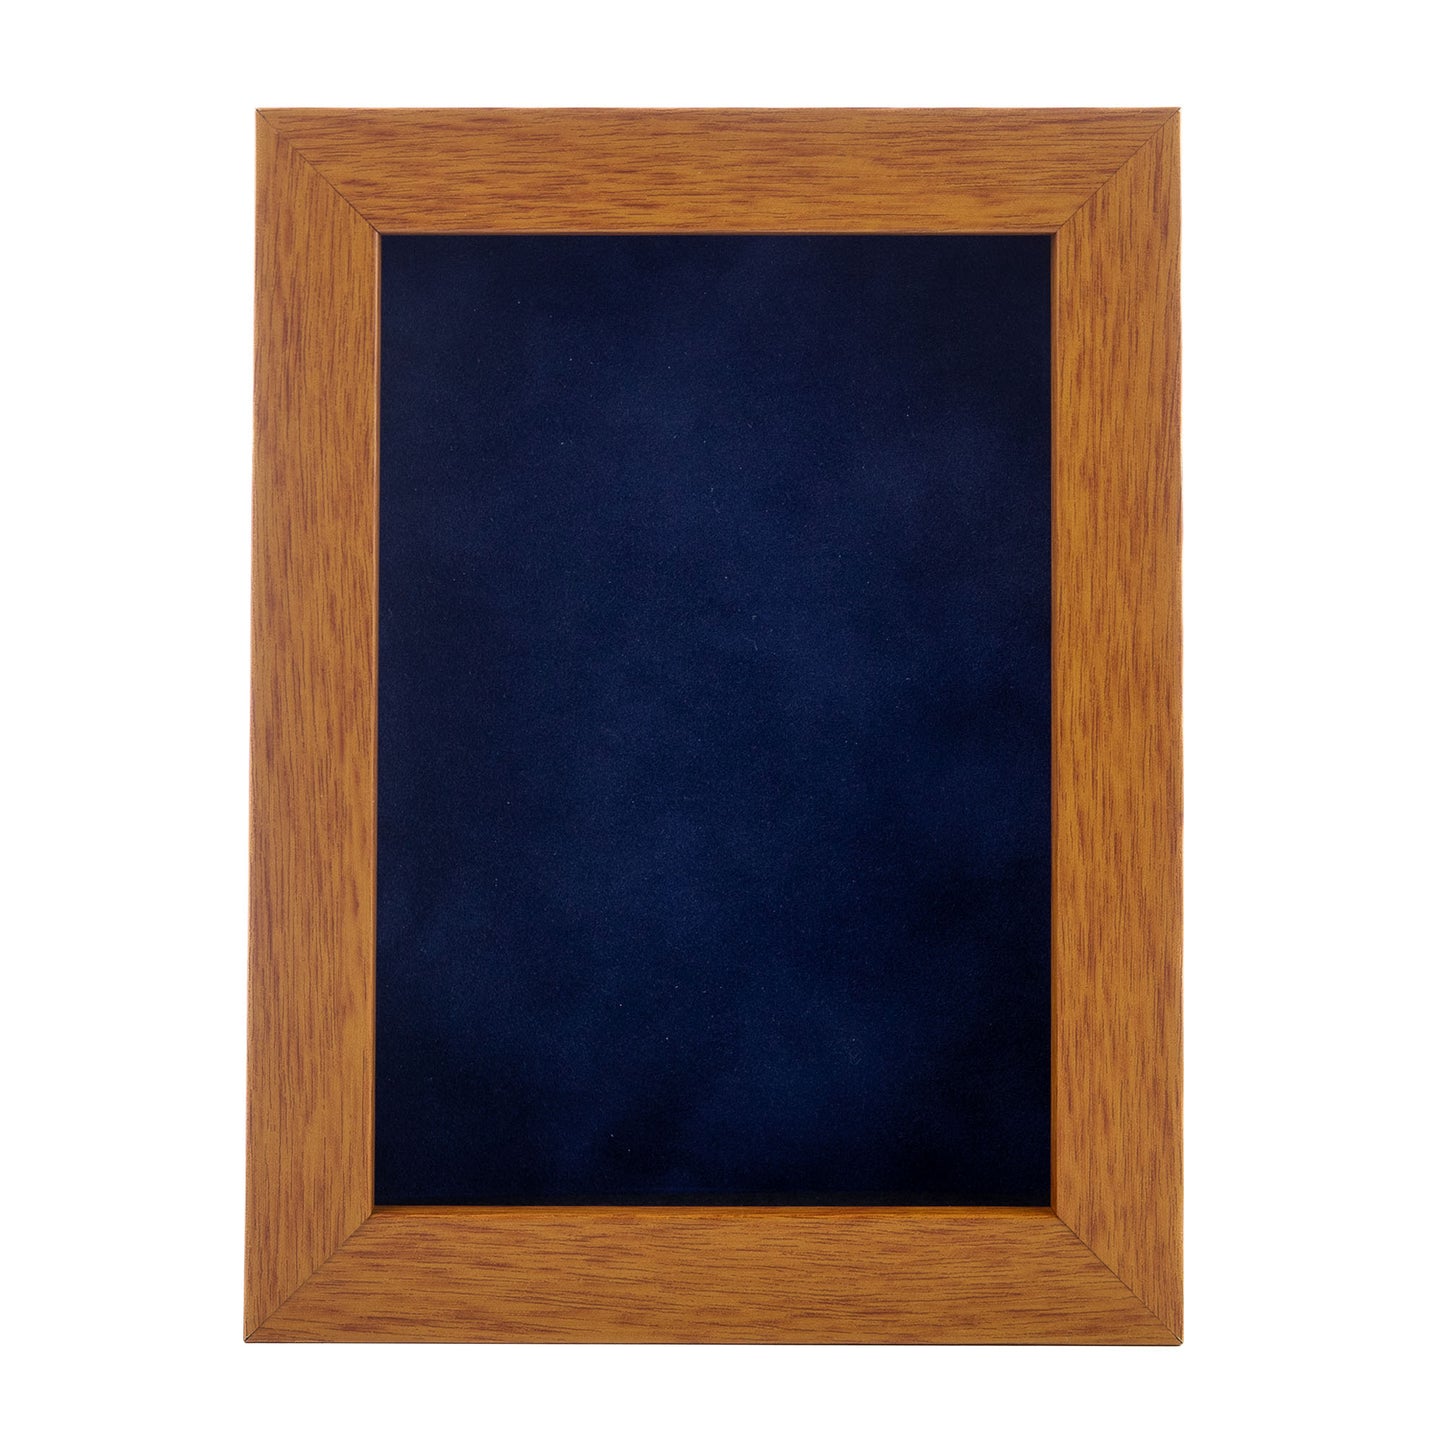 Honey Pecan Shadow Box Frame With Navy Blue Acid-Free Suede Backing